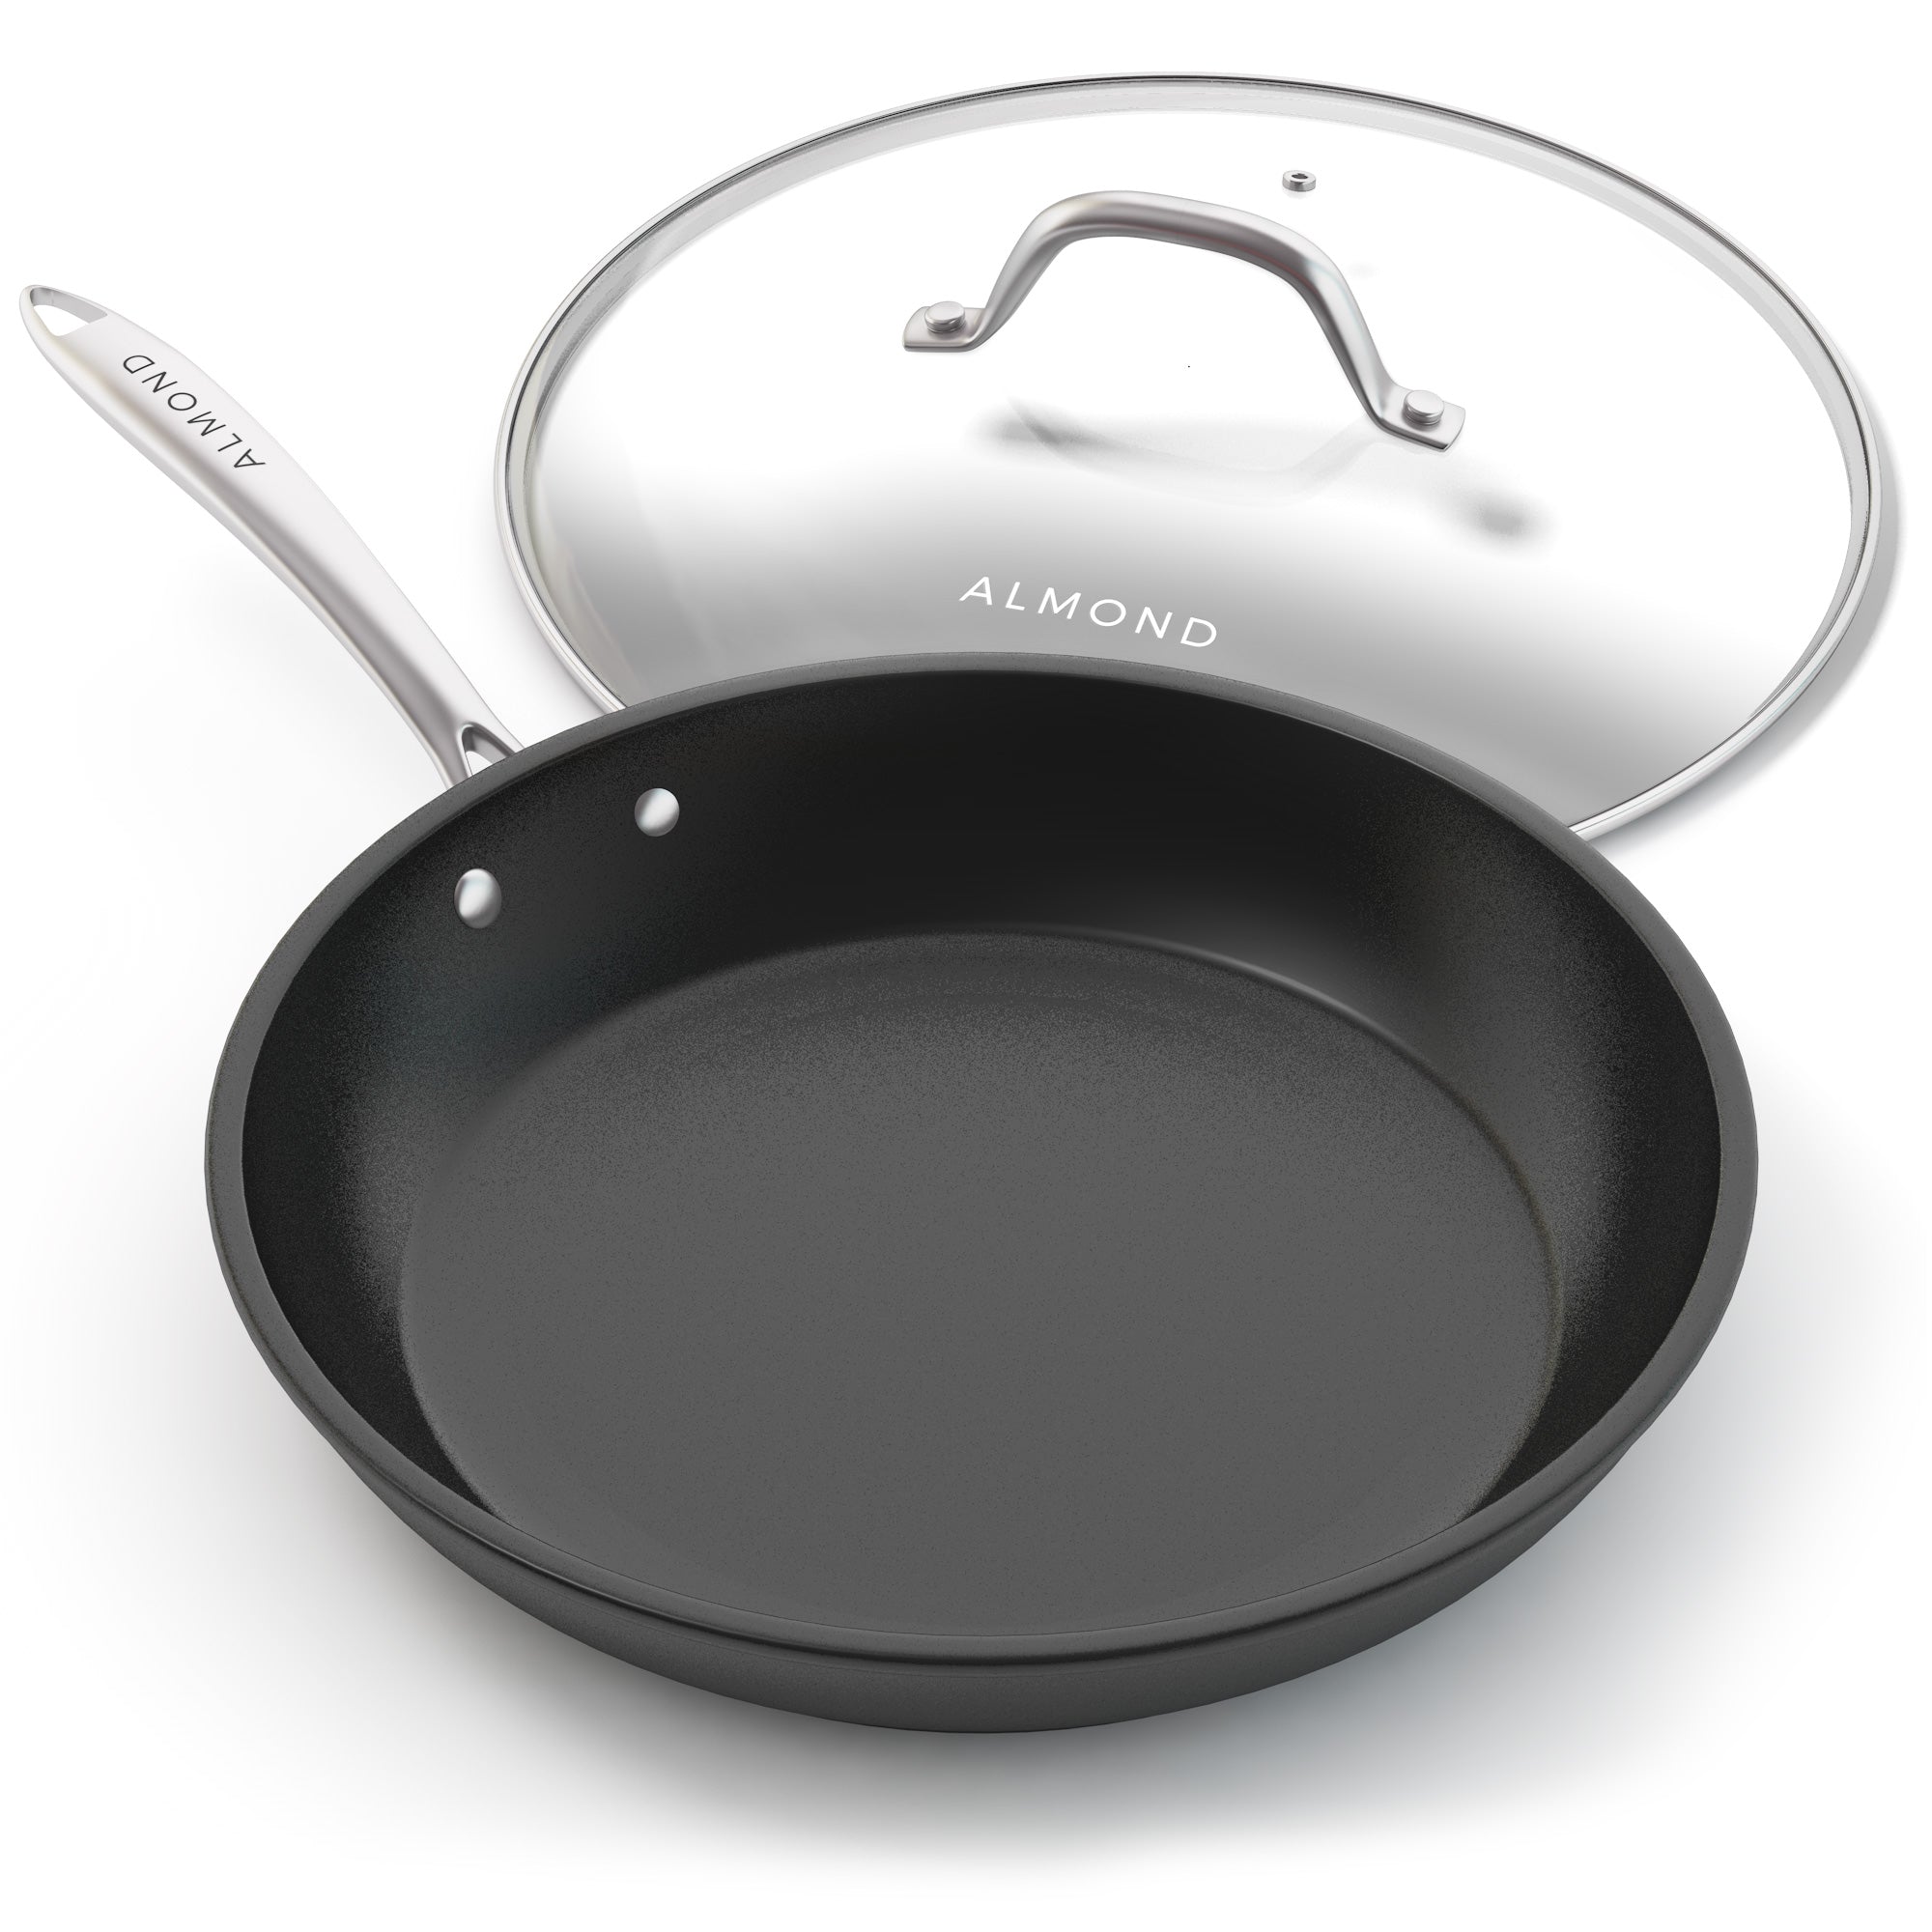 12-Inch Frying Pan Stainless Steel with Glass Cover